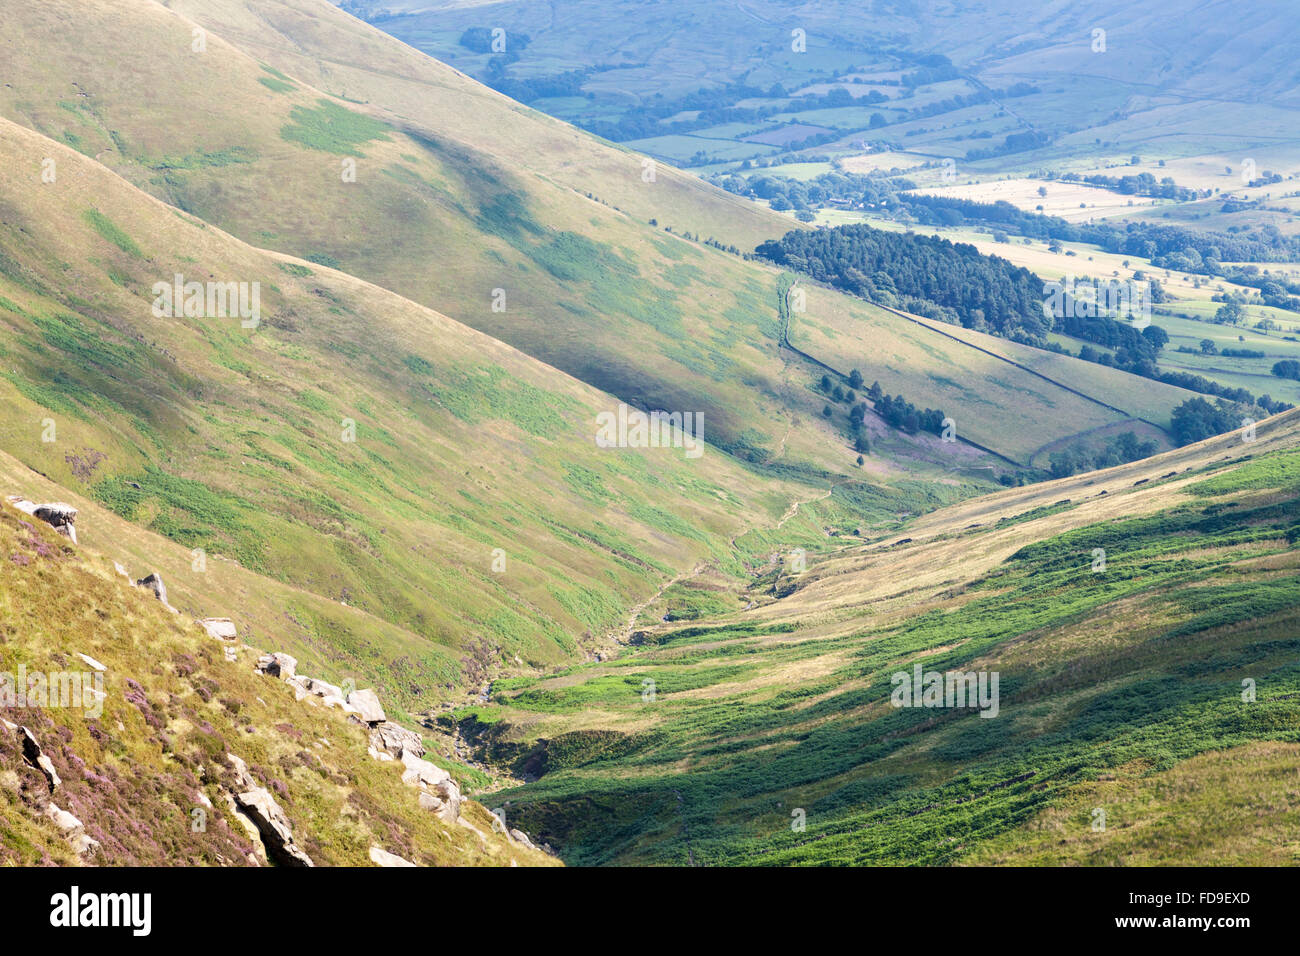 Derbyshire countryside. Crowden Clough and part of the Vale of Edale in Summer seen from Kinder Scout, Derbyshire, Peak District, England, UK Stock Photo